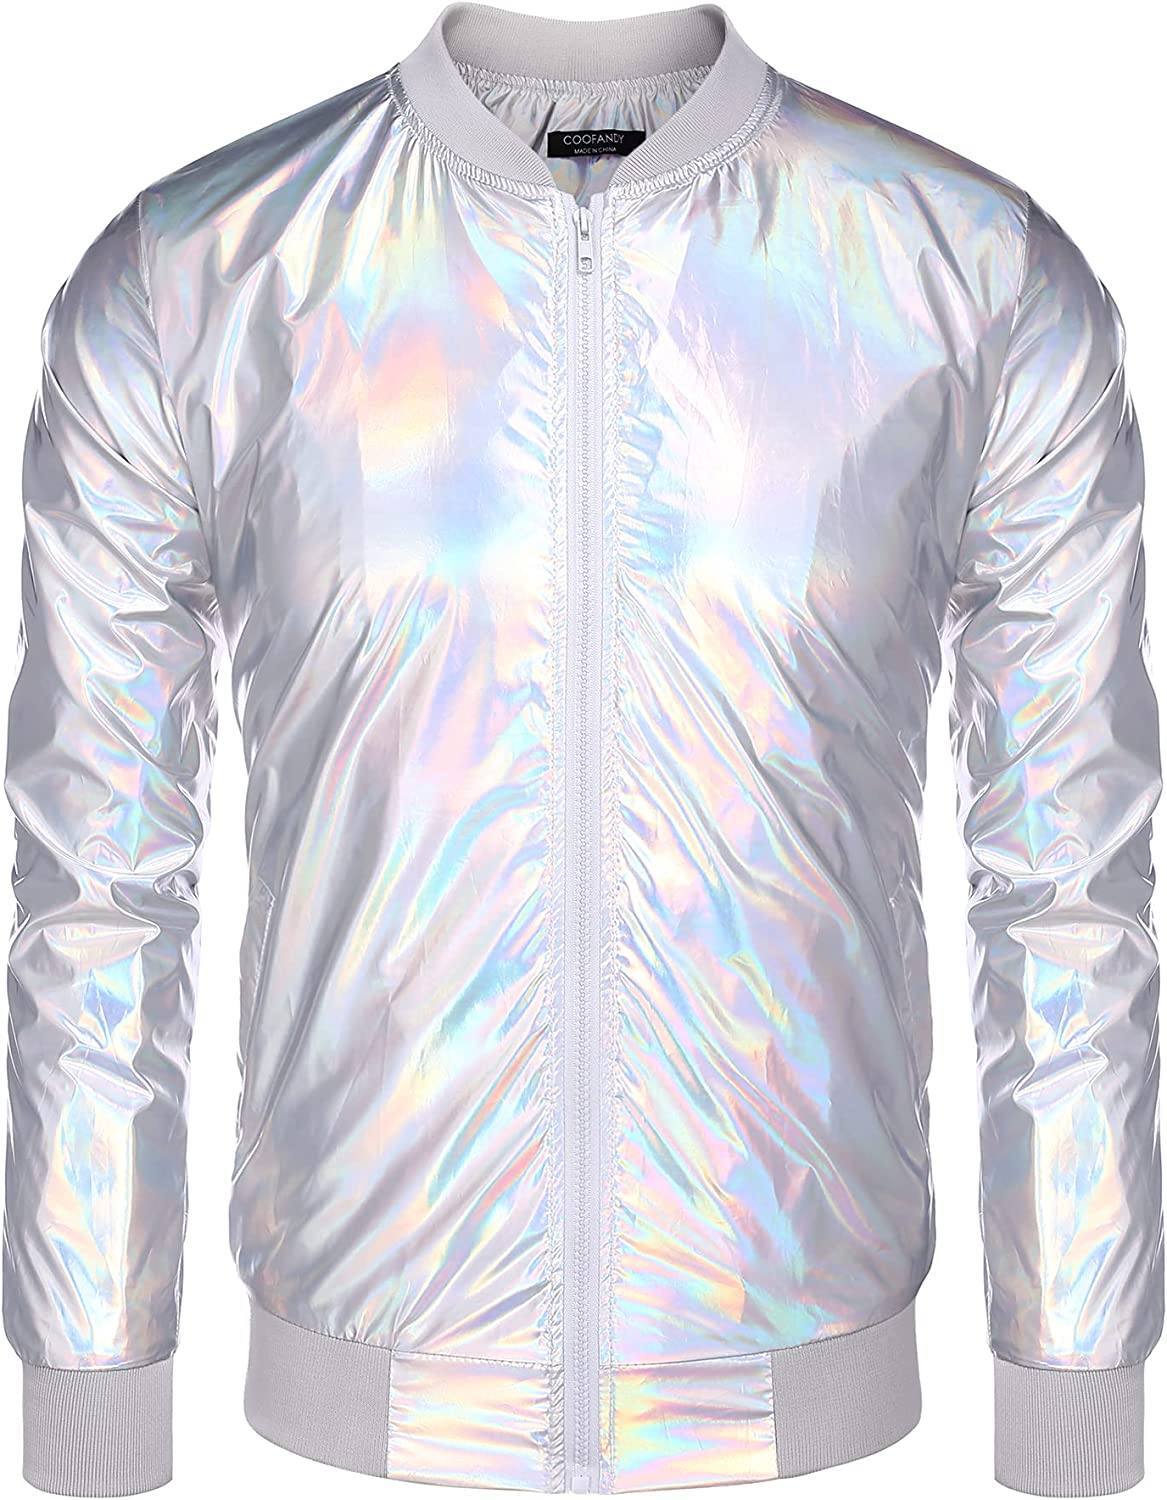 70s Disco Christmas Party Zip-up Jacket